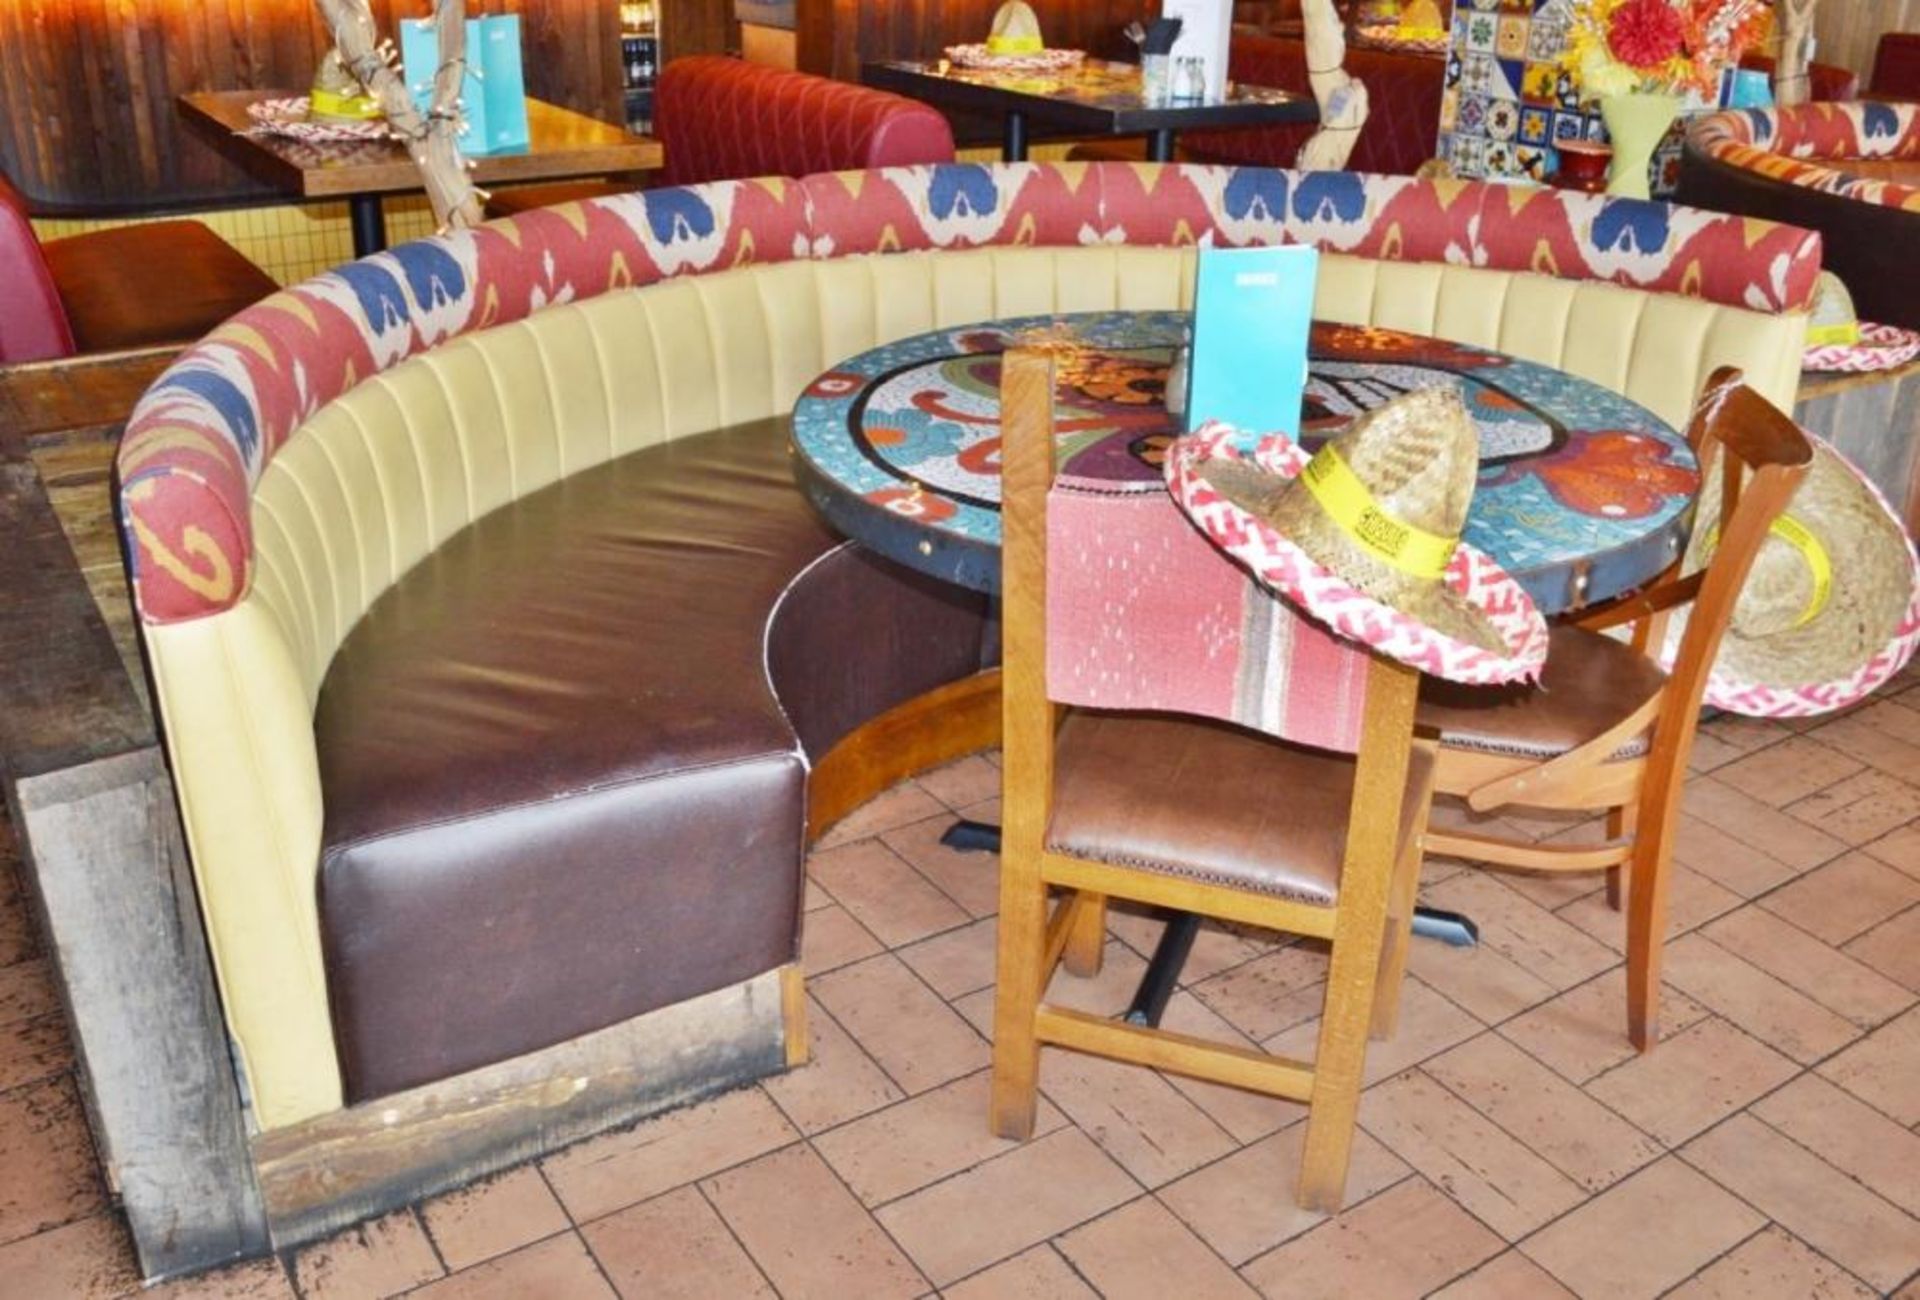 2 x Half Circle Seating Booths / Banquet Seating - Faux Leather Brown Seating With Yellow and Brown - Image 6 of 15